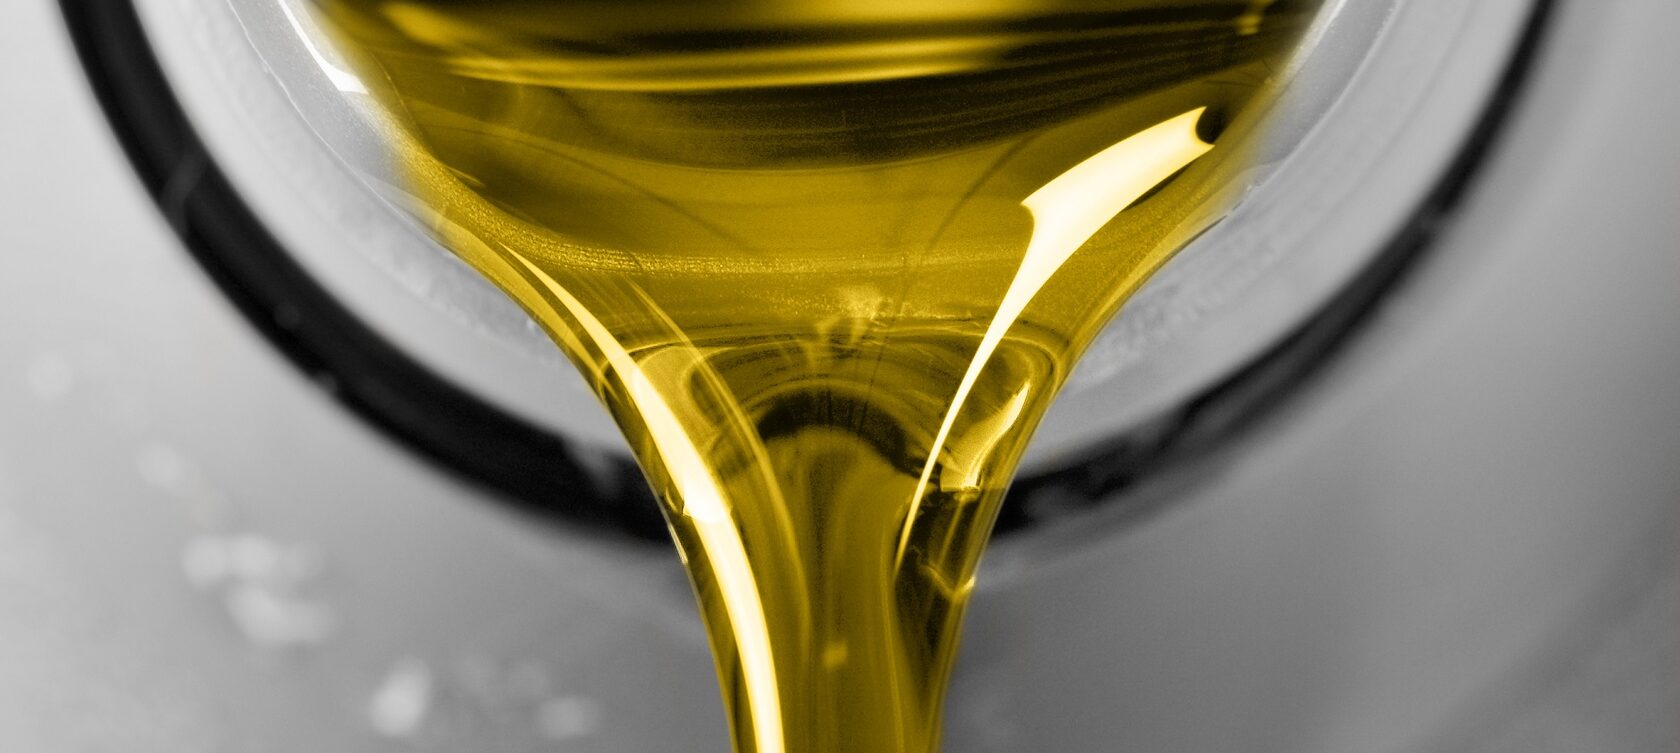 Industrial Oil and Fluids